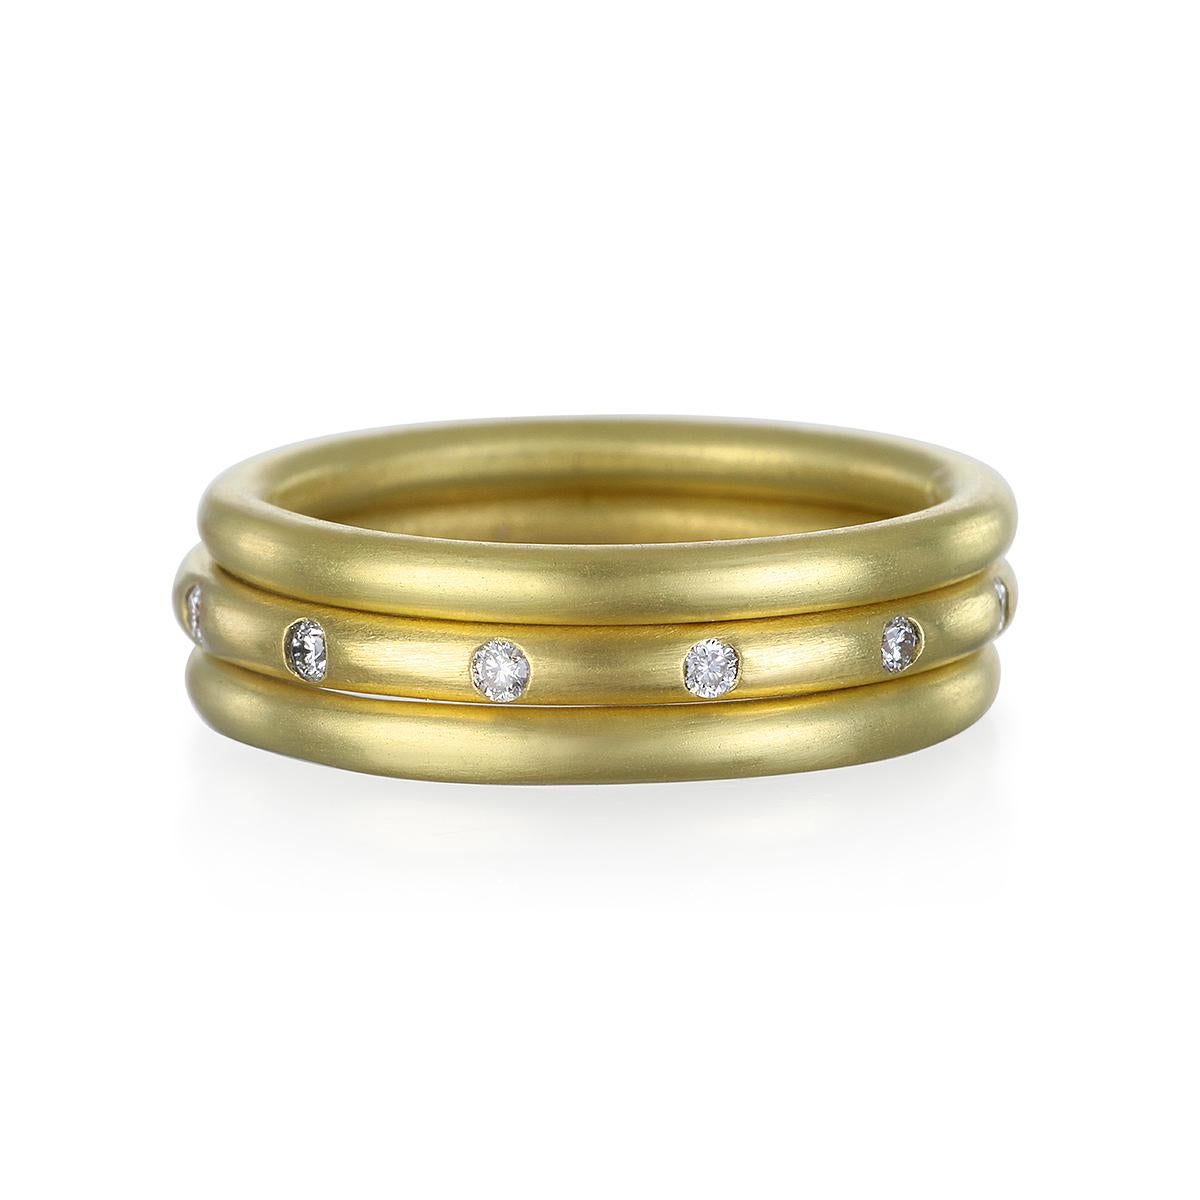 Contemporary Faye Kim 18 Karat Gold Round Band Ring - 2mm For Sale